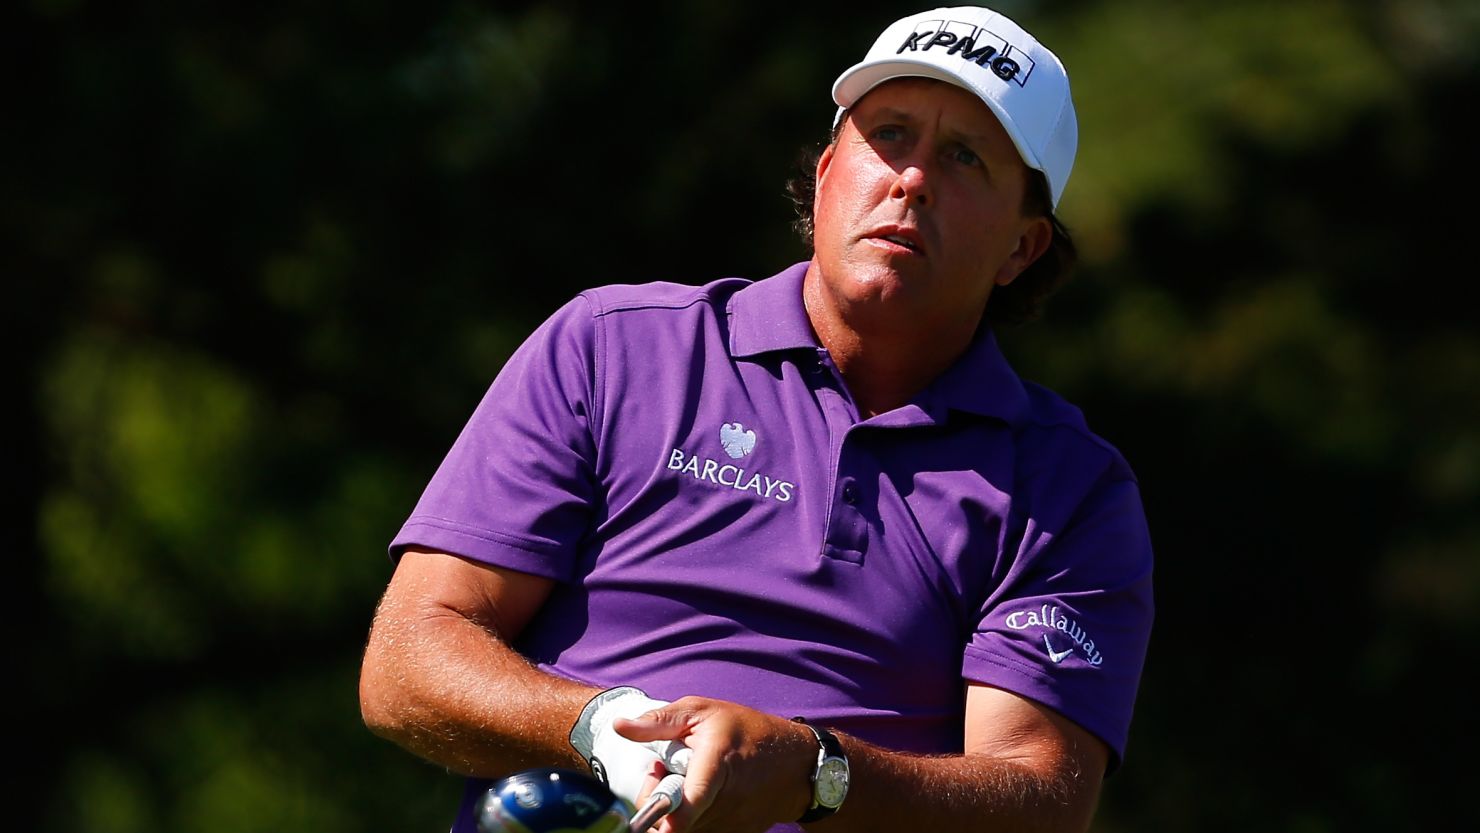 Phil Mickelson shot a level par 72 third round at the Memorial to trail the leaders.